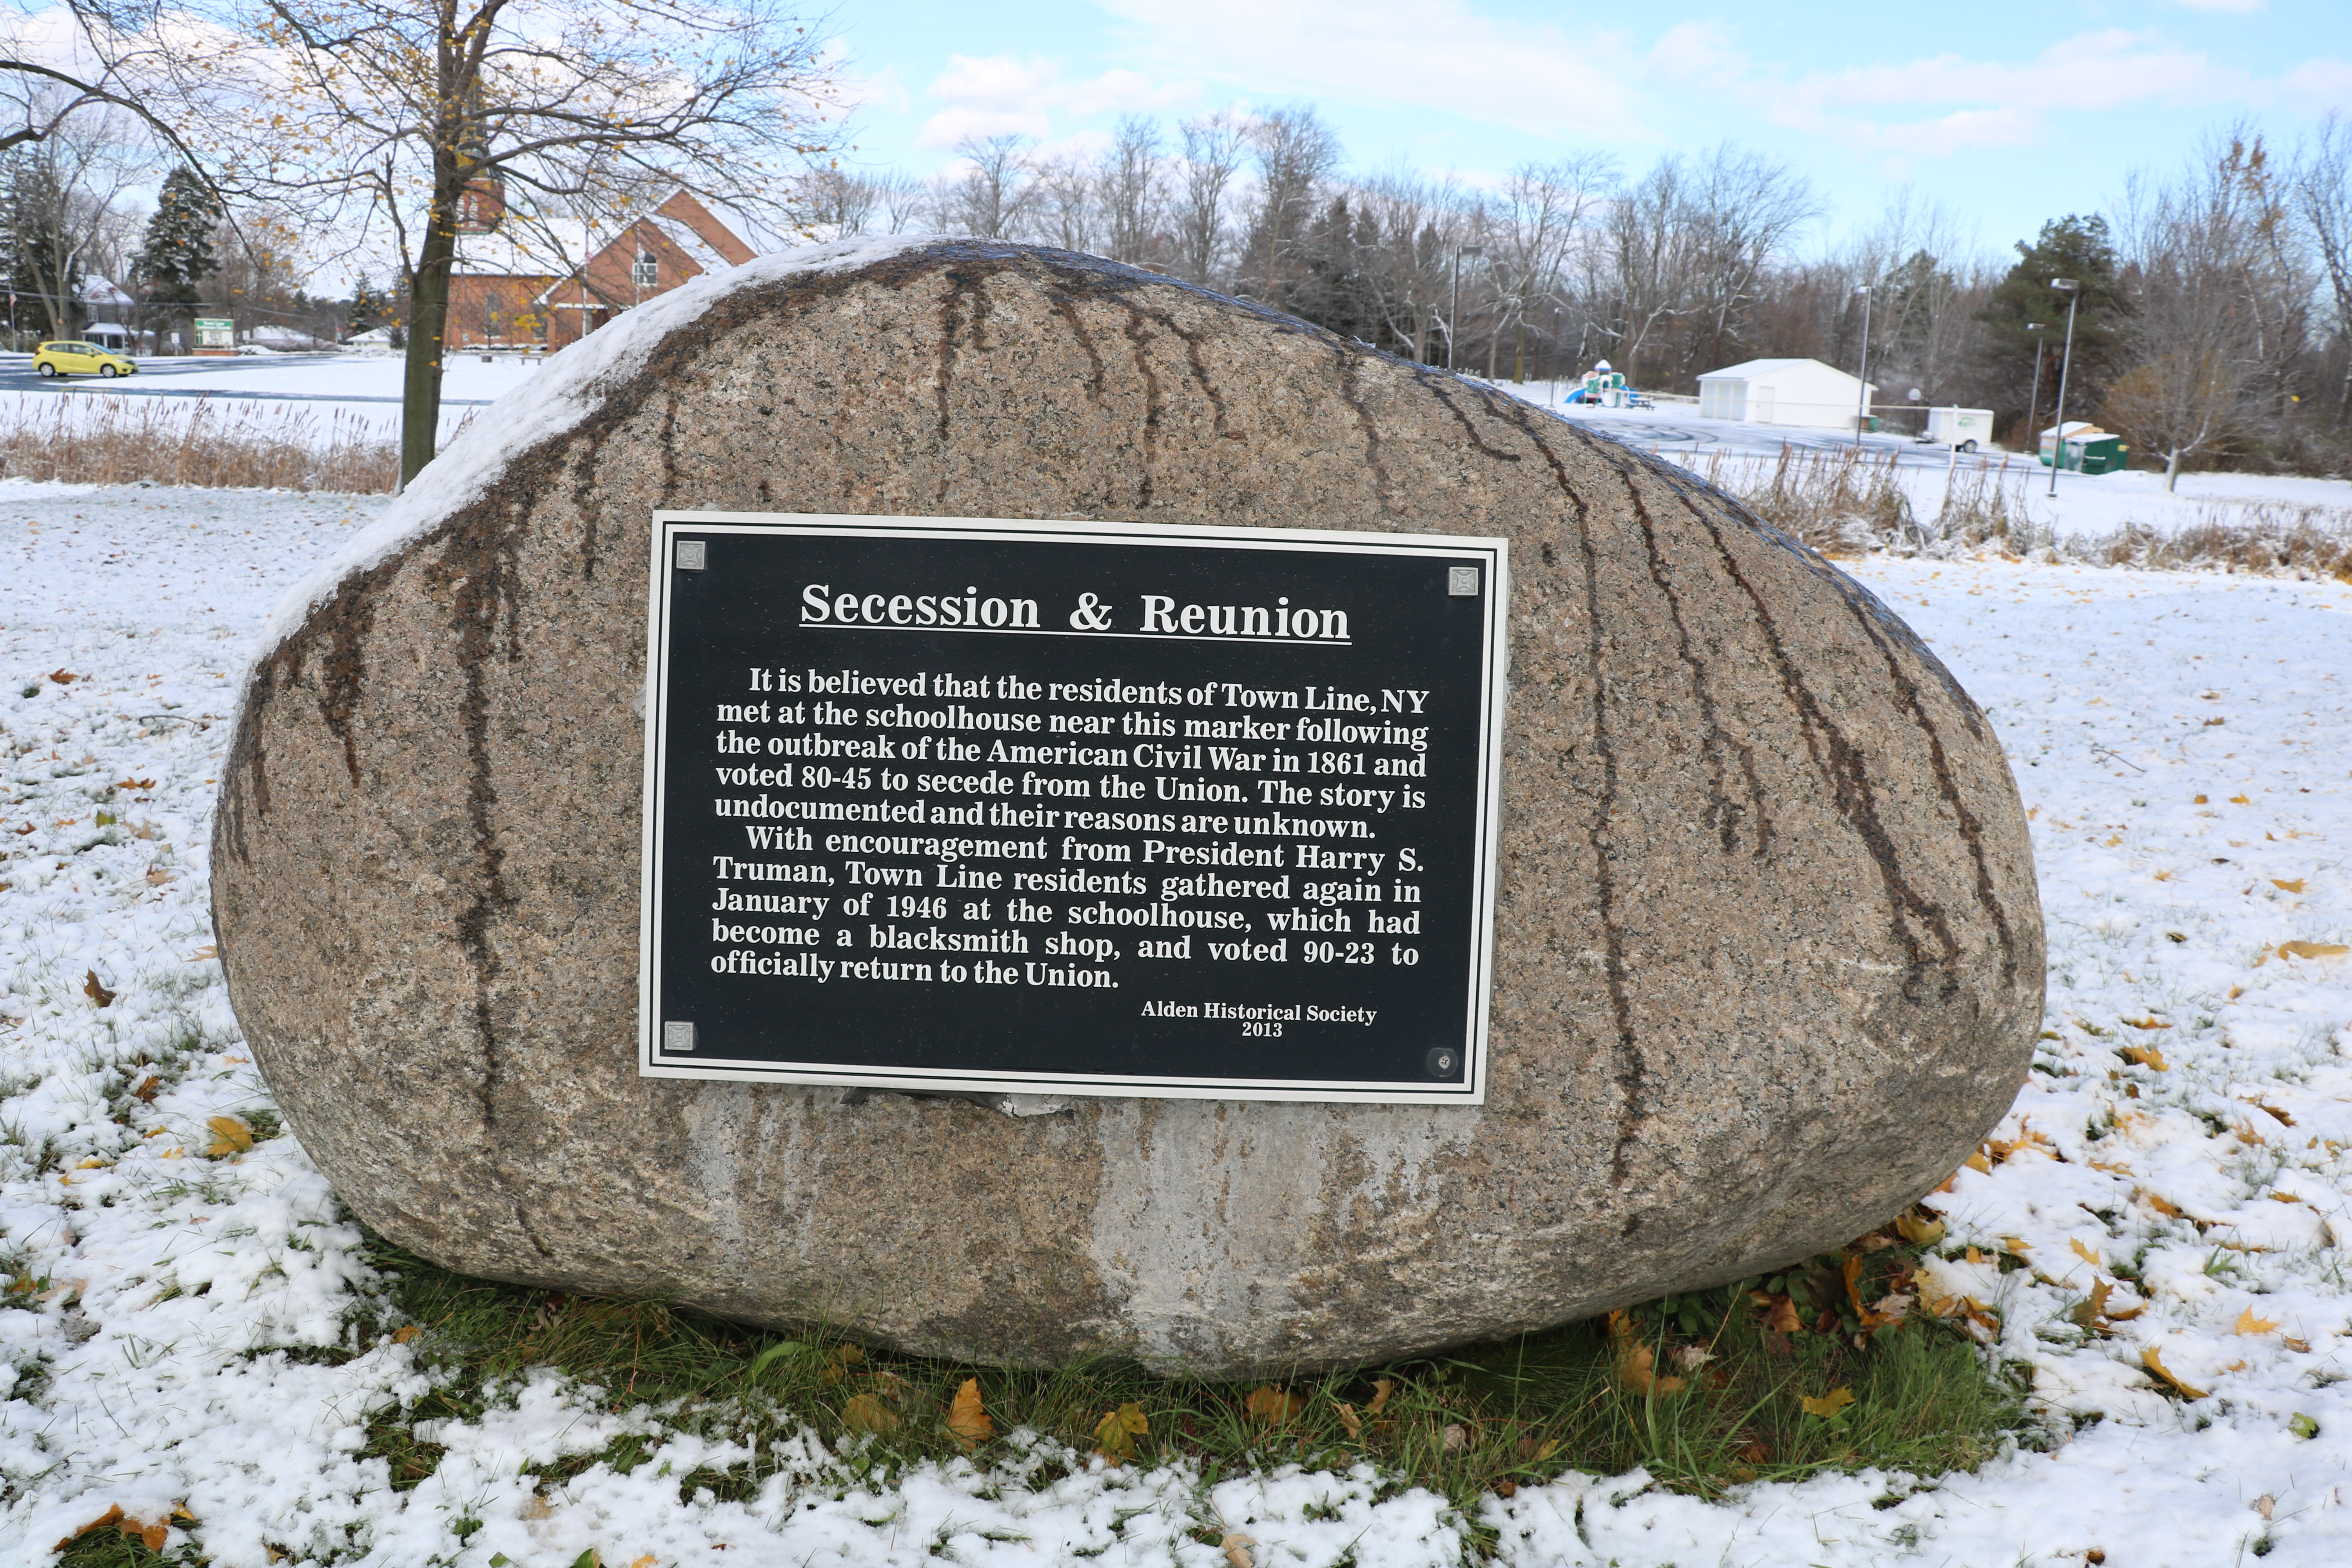 Secession & Reunion - It is believed that the residents of Town Line, NY met at the schoolhouse near the marker following the outbreak of the American Civil War in 1861 and voted 80-45 to secede from the Union. The story is undocumented and their reasons are unknown. With encouragement from President Harry S. Truman, Town Line residents gathered again in January of 1946 at the schoolhouse, which had become a blacksmith shop, and voted 90-23 to officially return to the Union. -Alden Historical Society (2013)